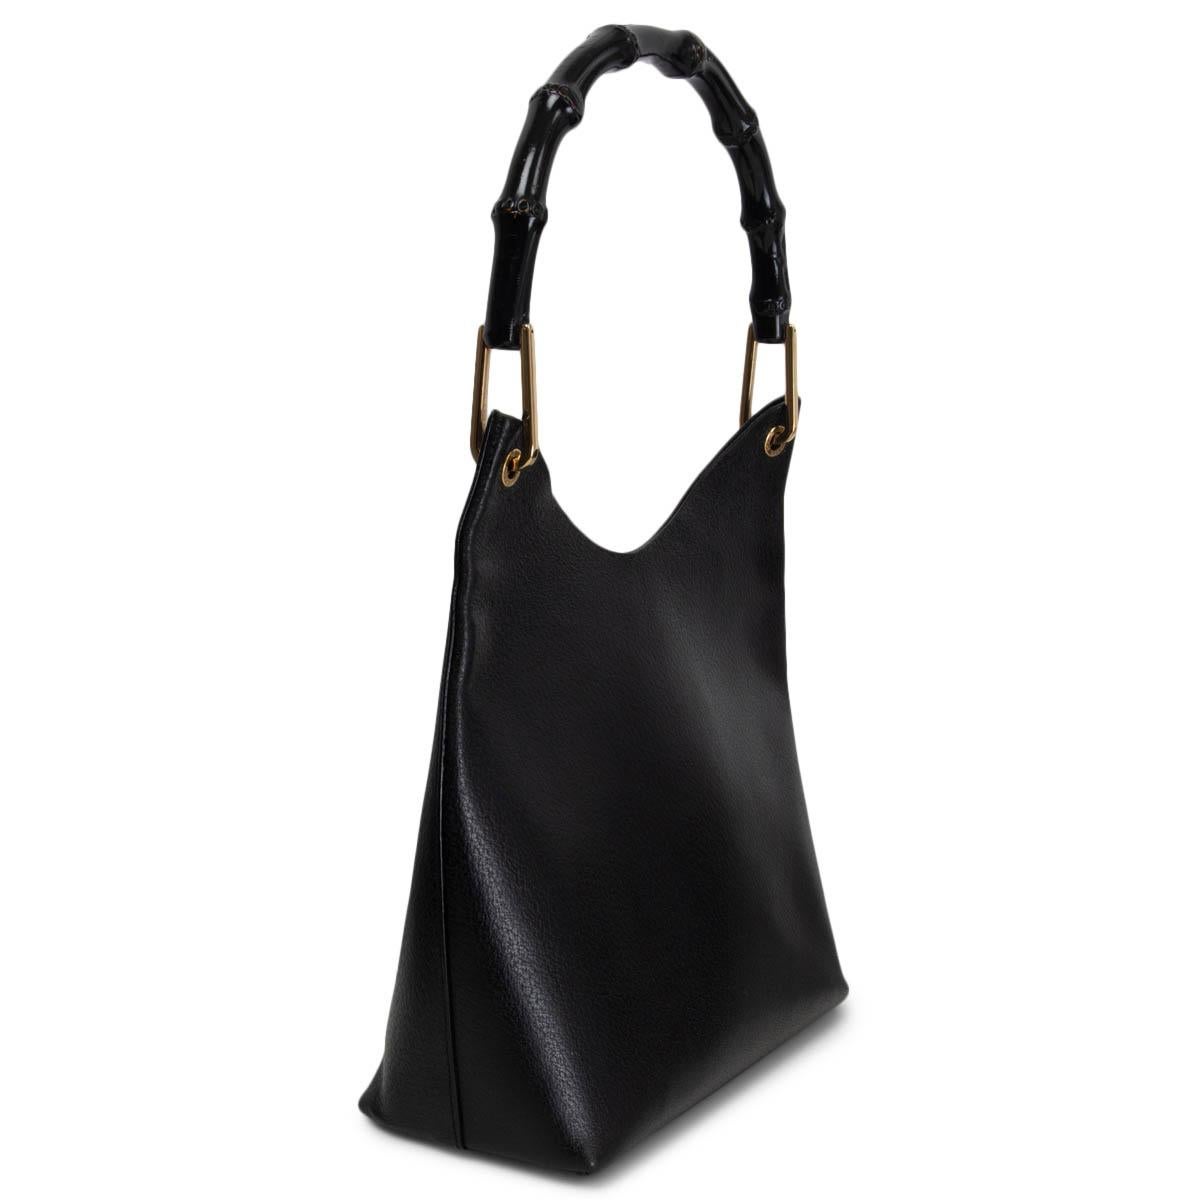 100% authentic Gucci by Tom Ford Bamboo hobo bag in black pigskin leather featuring black bamboo handle.  Lined in black suede with an attached pouch inside and gold-tone hardware. Has been carried and the inside pouch has a small blue stain inside.